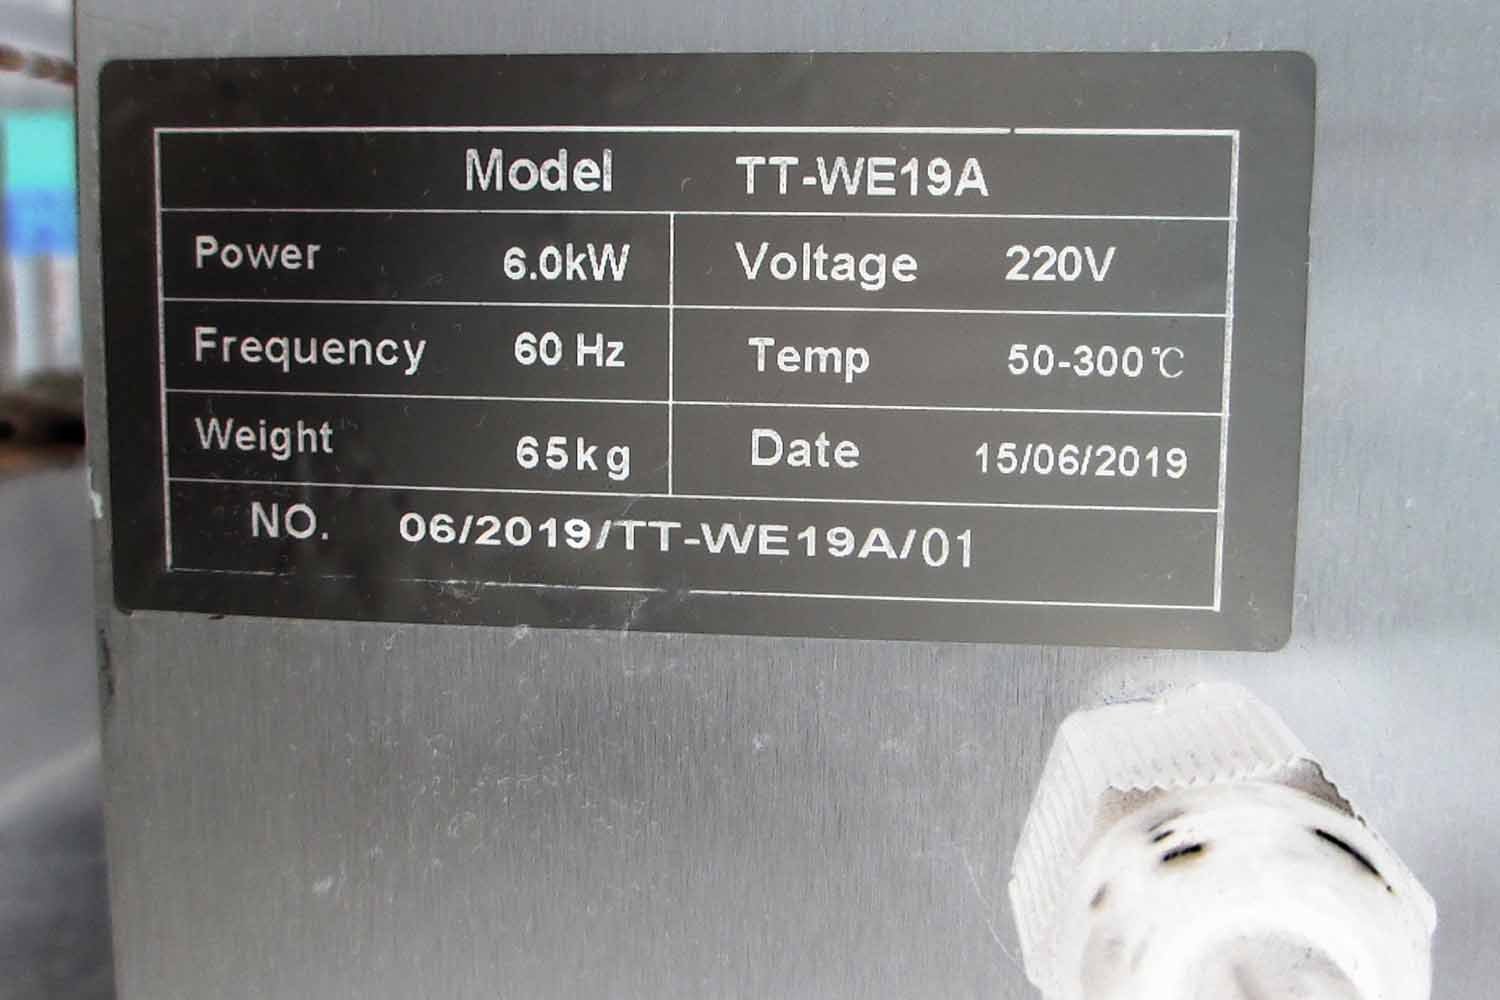 Specification of TT-WE19A